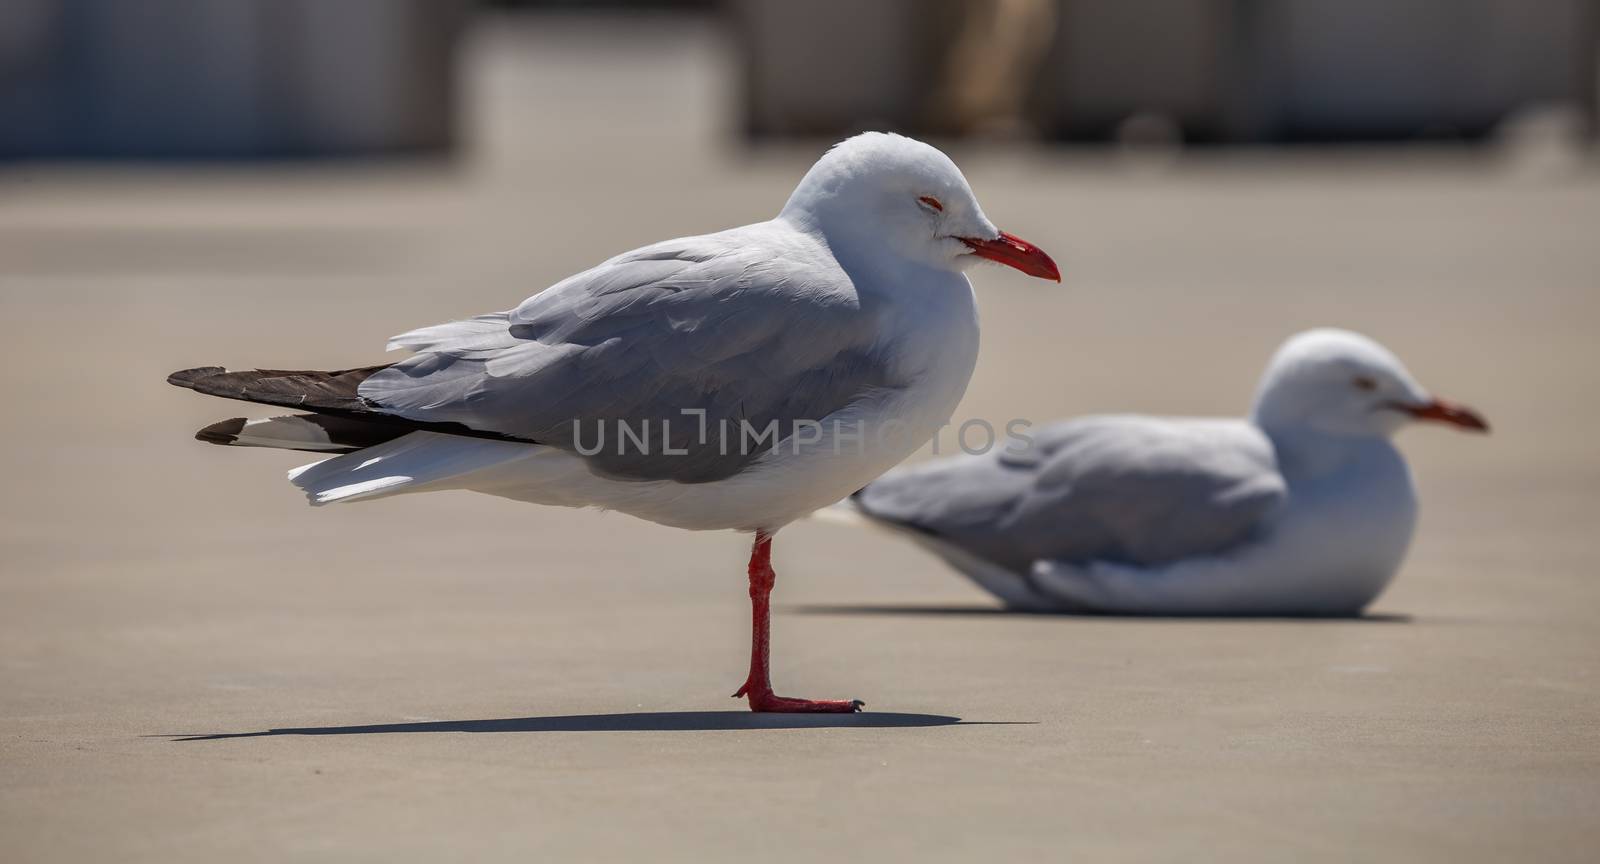 Two sleeping seagulls on concrete. One is standing in the foreground. The second one is in soft focus and is sitting in the background